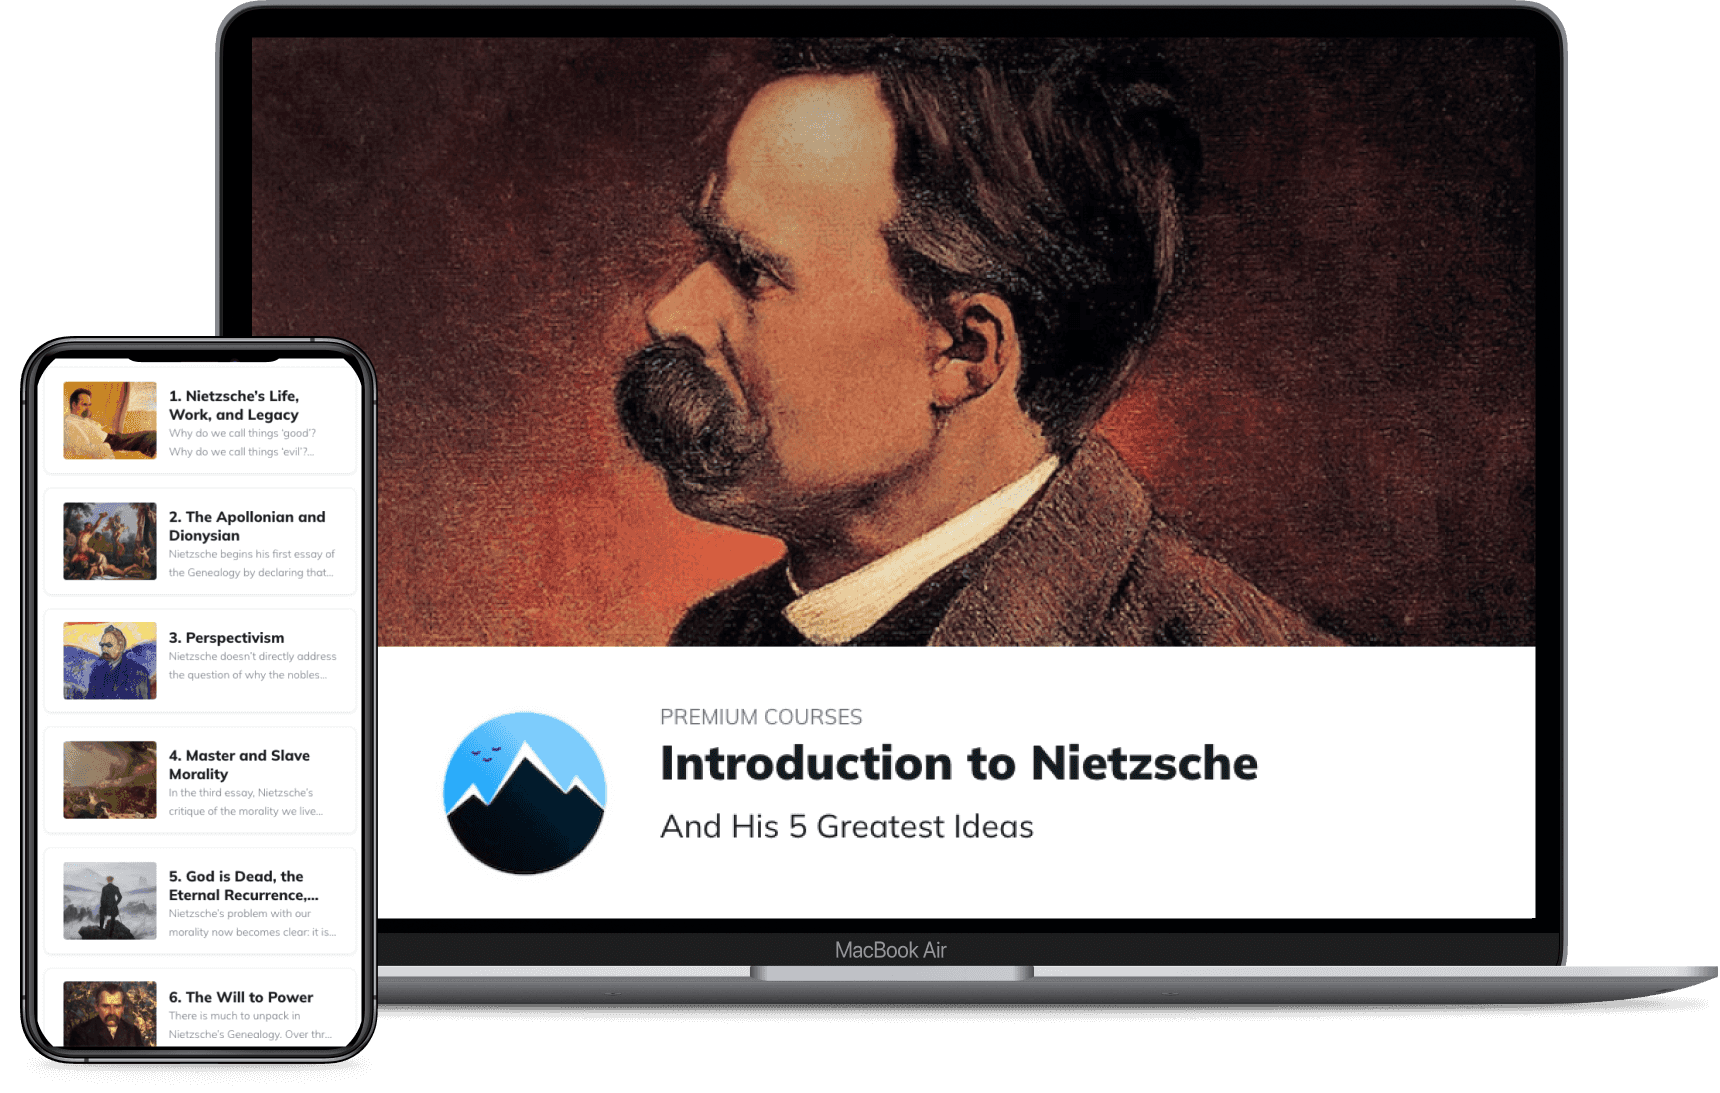 Introduction to Nietzsche and His 5 Greatest Ideas